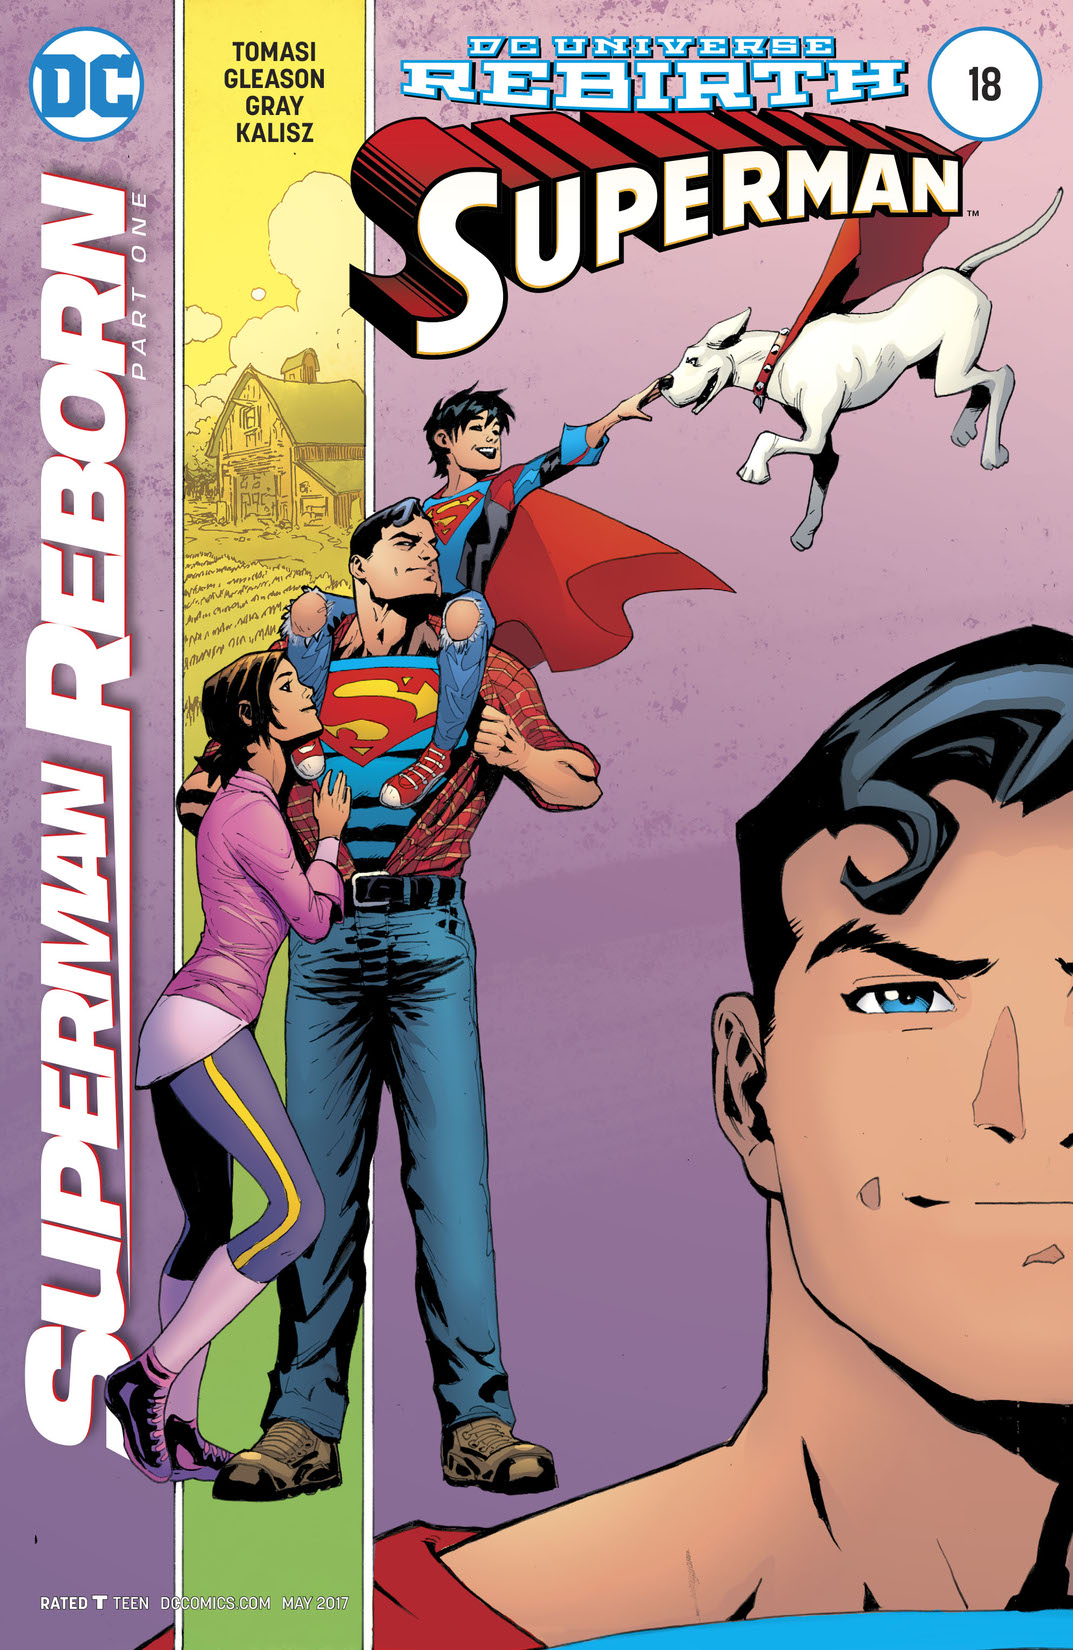 Superman (2016-) #18 preview images